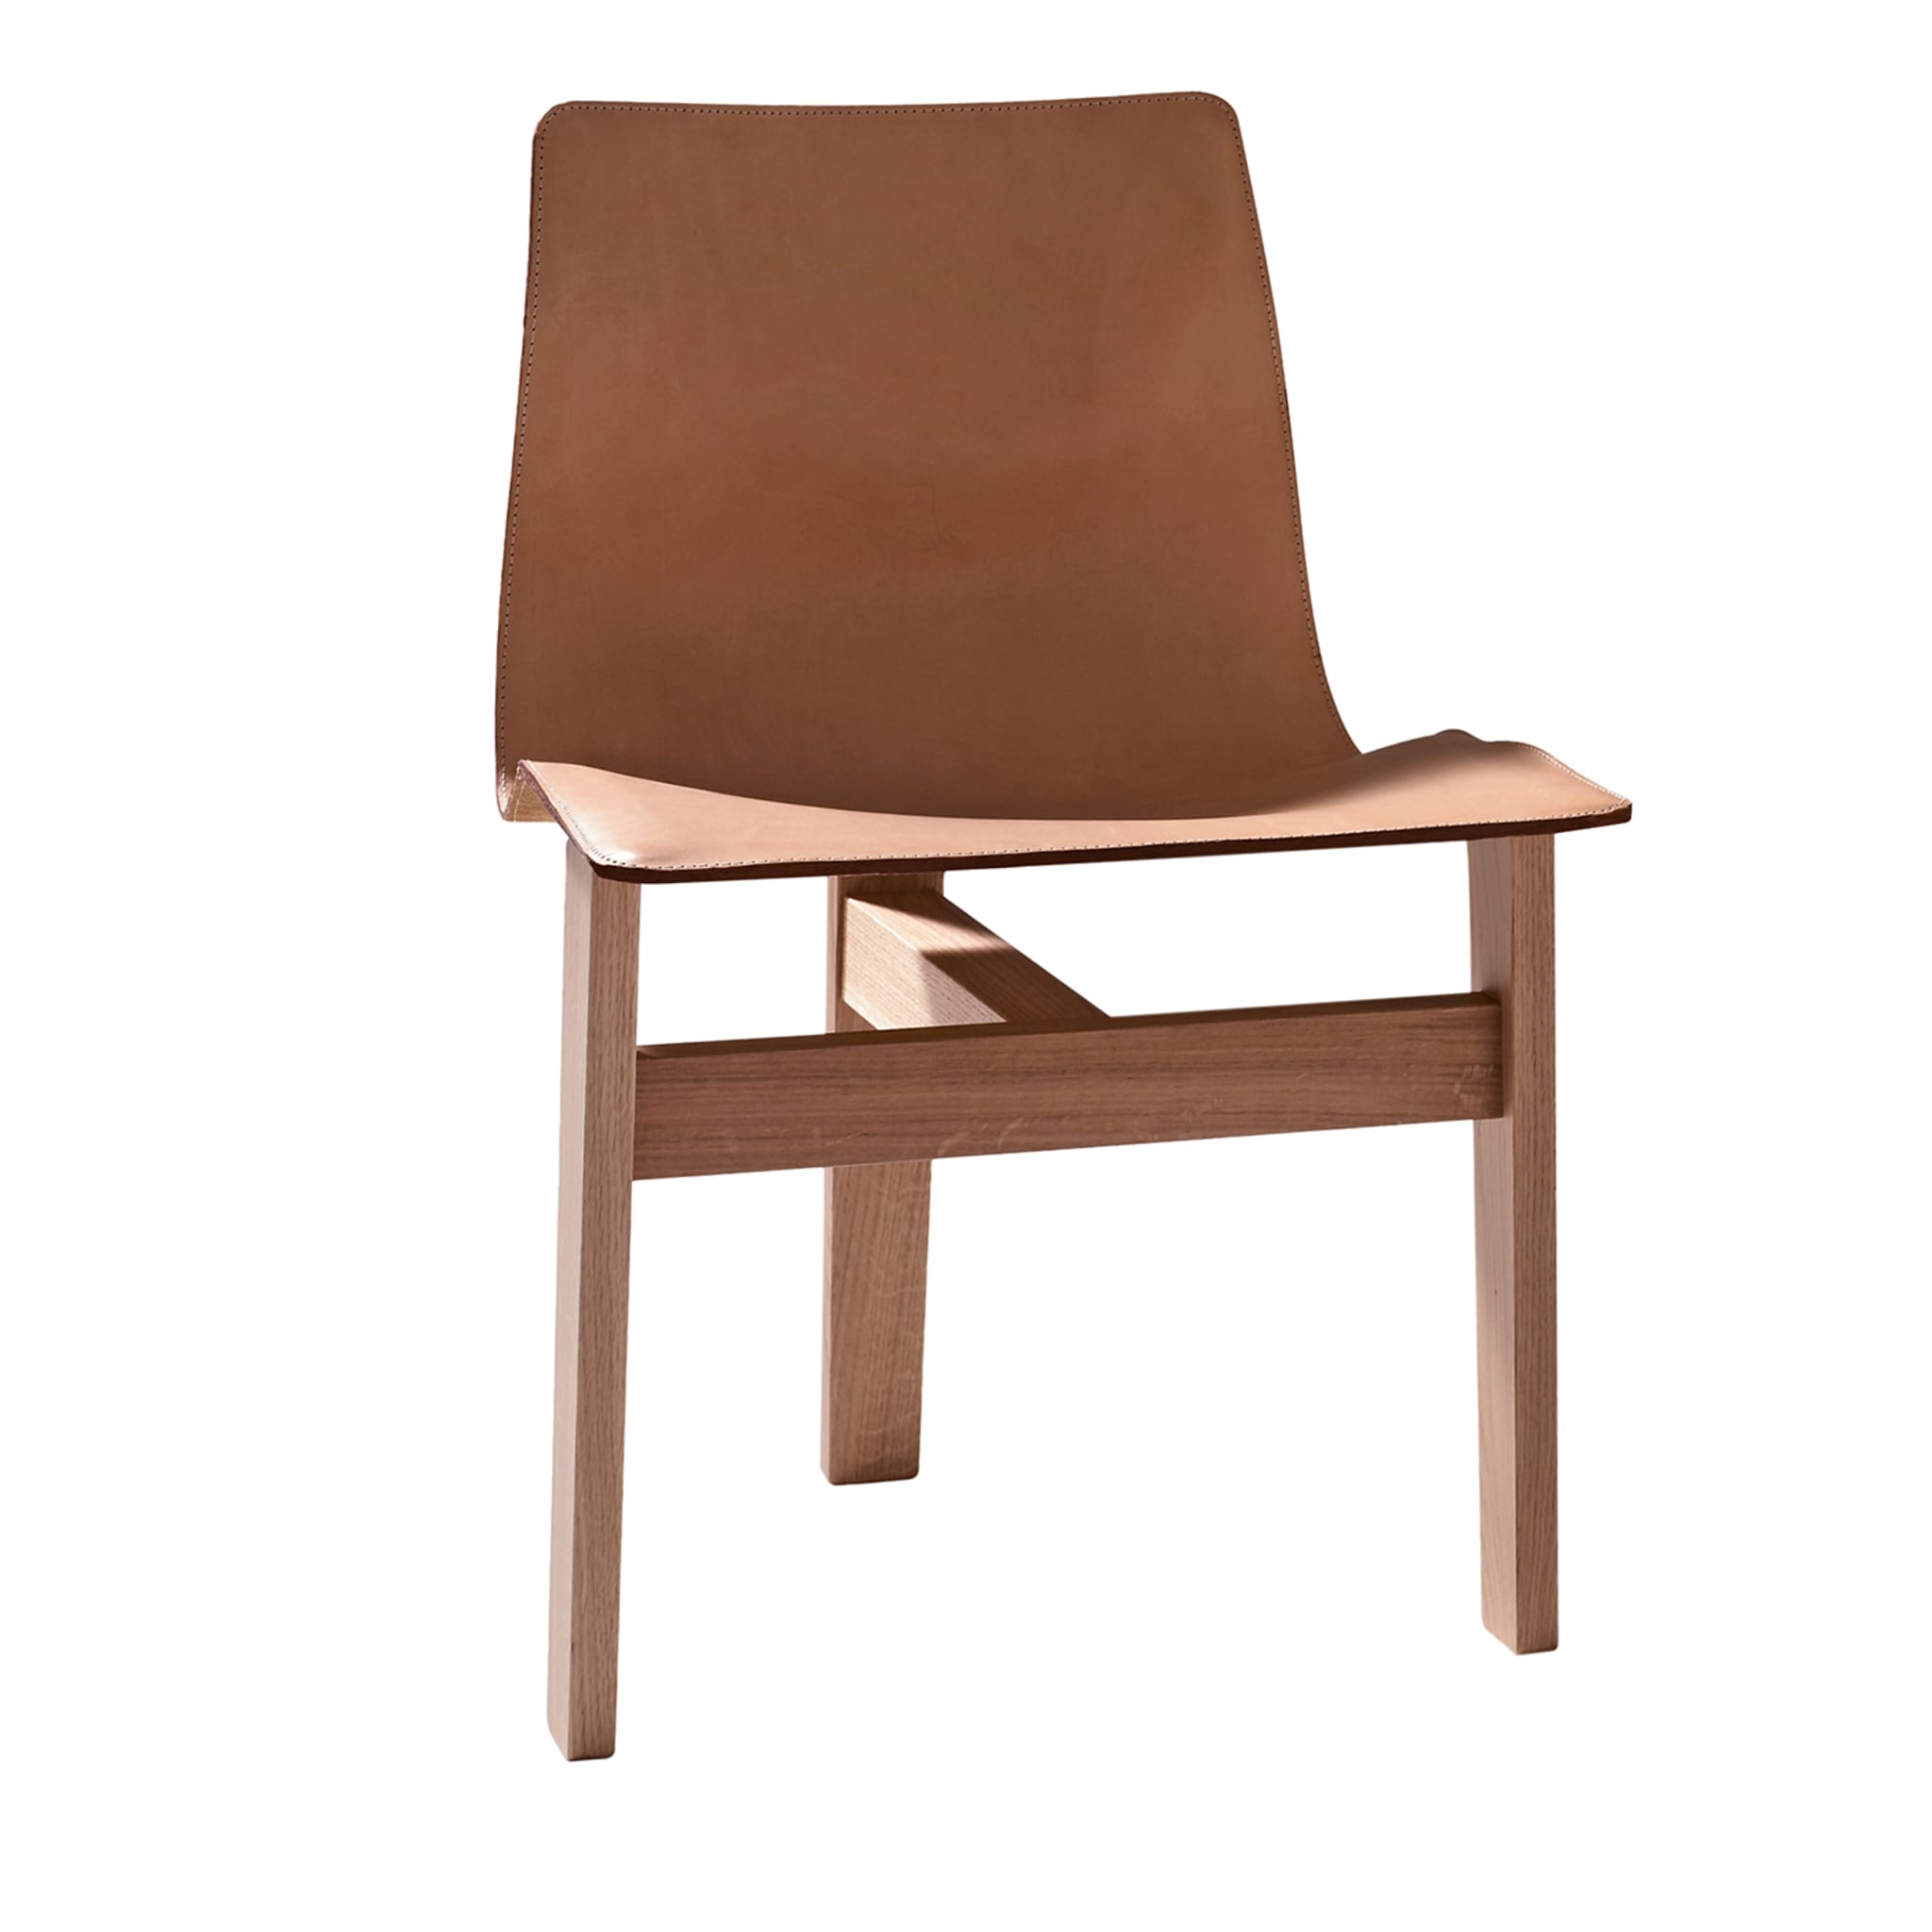 Tre Durmast Natural Leather Chair by Angelo Mangiarotti - Main view